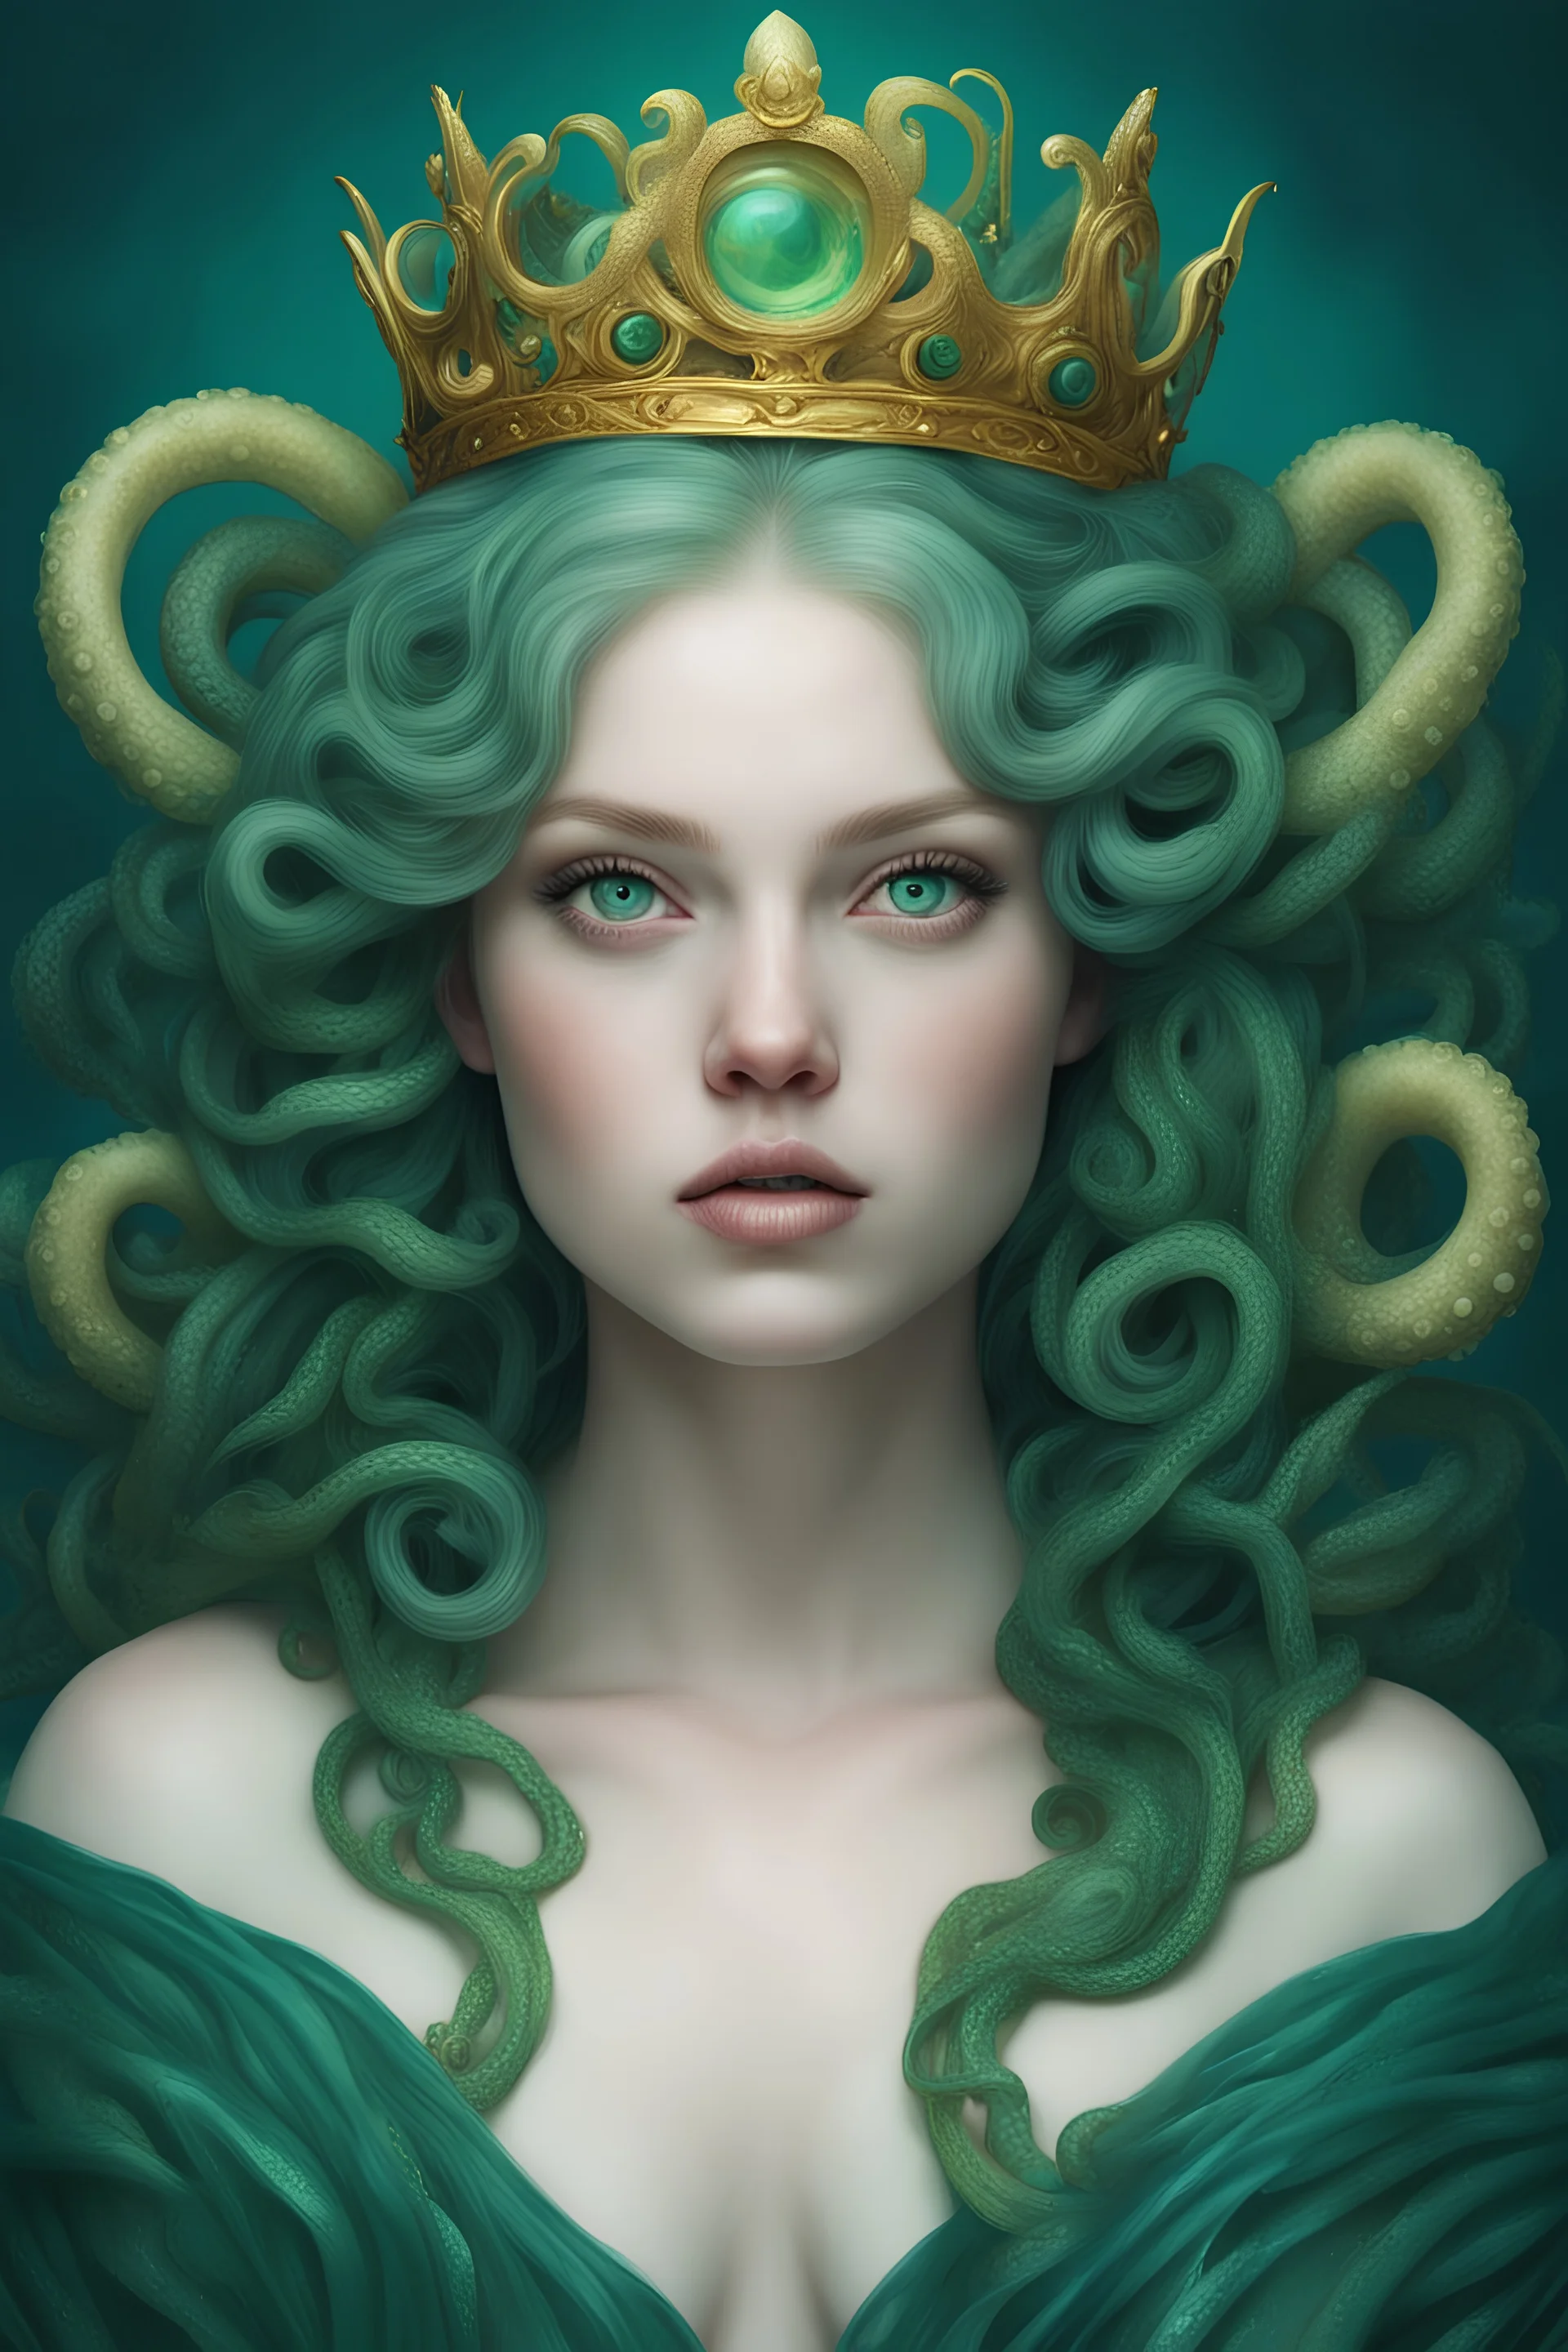 Ultra realistic portrait of a pale girl, beautiful chubby face, green eyes, hair made from tentacles of jelly skin with dark aqua color like medusa, greek crown ornament of gold, midle shoot